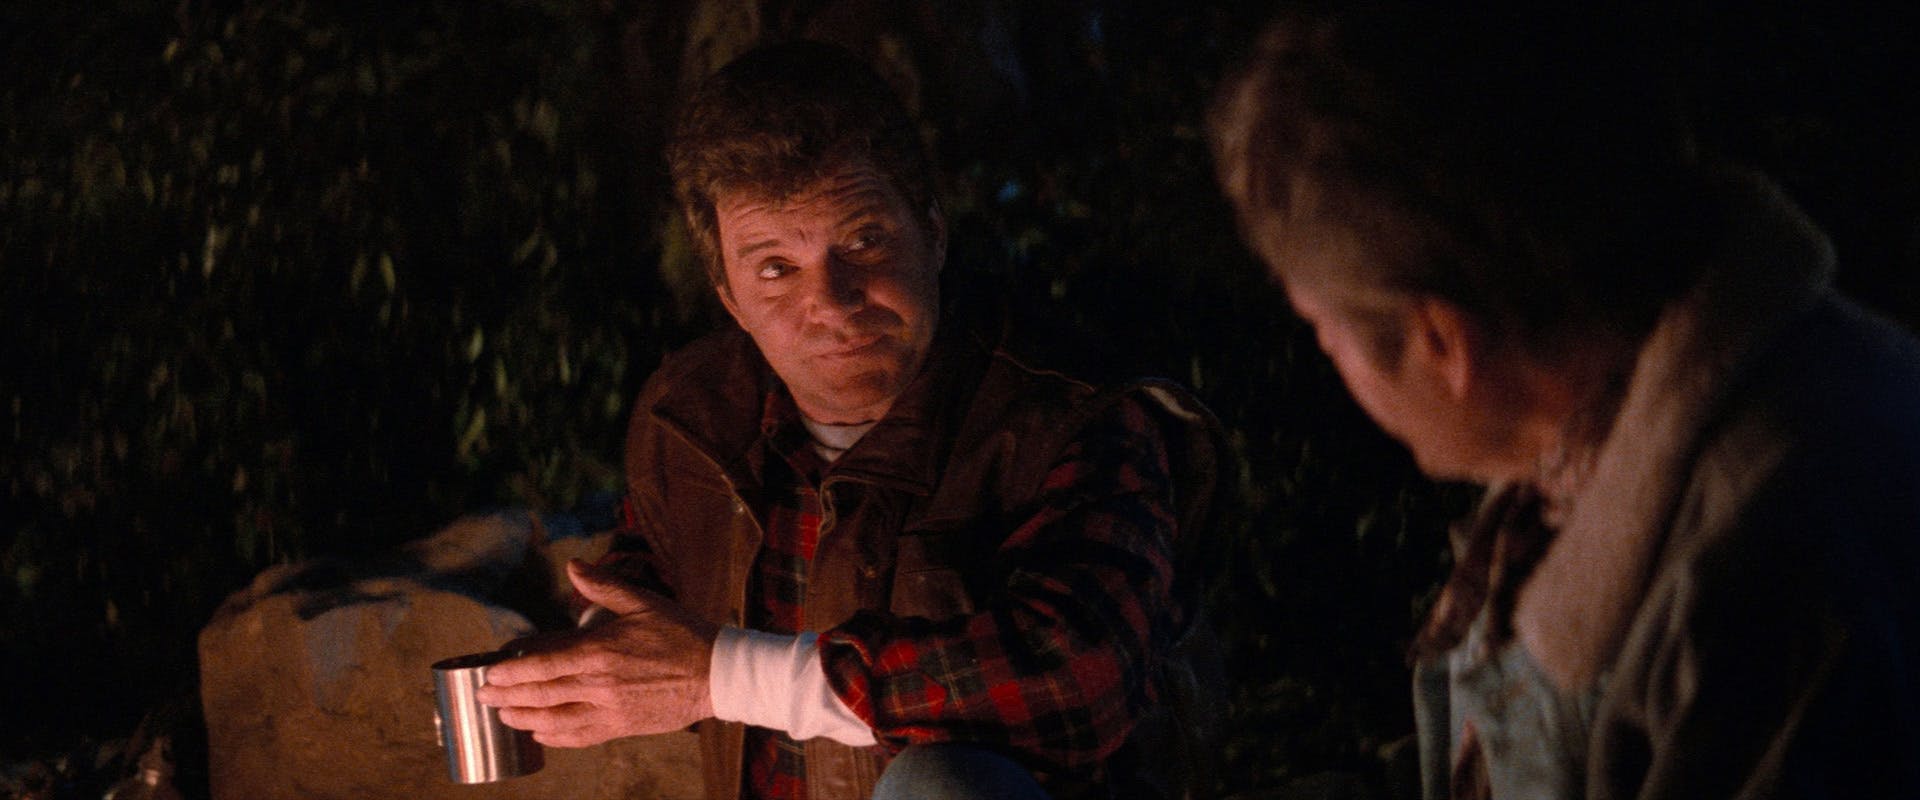 Seated around a campfire, Kirk holds his tin cup in his hand as he looks over at McCoy in Star Trek V: The Final Frontier